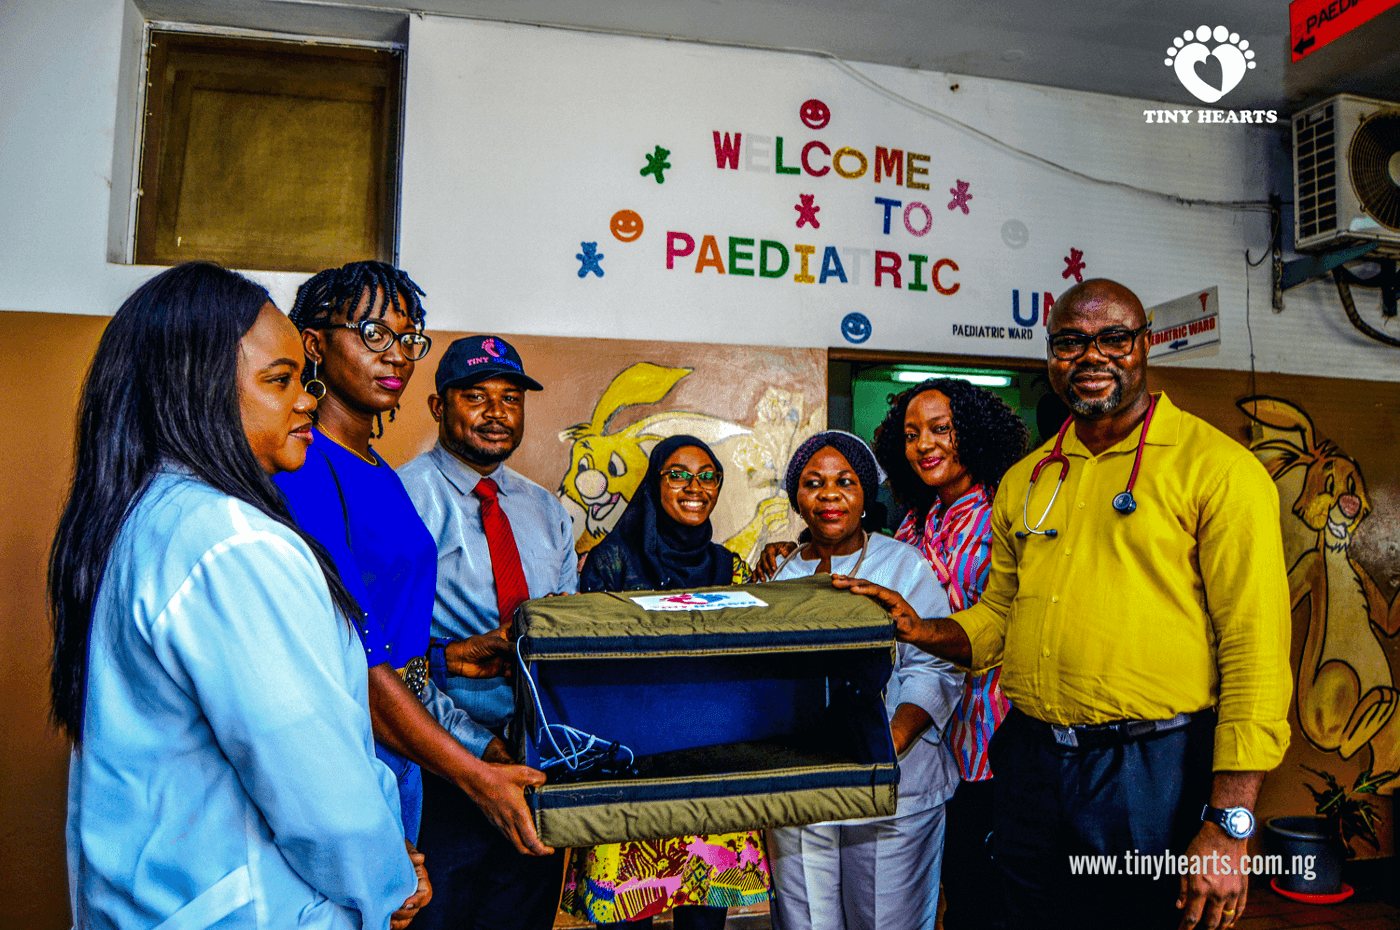 The features embedded in the unit makes it easy to be used in any part of the world including rural areas since it does not require electricity to function therefore all health centres across the globe can access the unit and save children from the effects of untreated jaundice.